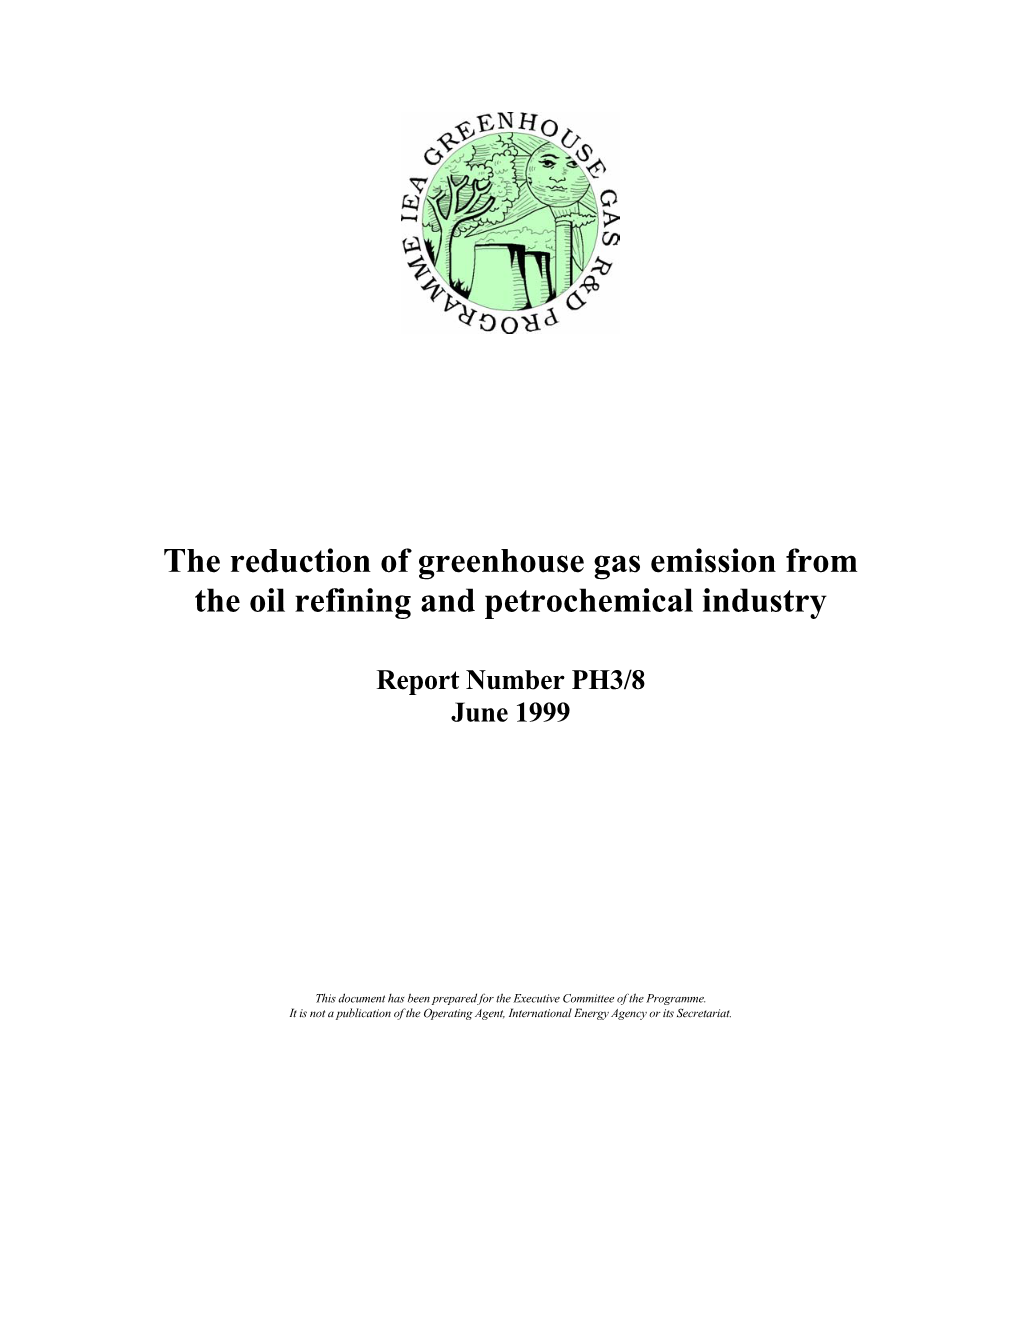 Reduction of Greenhouse Gas Emissions from the Oil Refining and Petrochemical Industry Reference Number: PH3/8 Date Issued: June 1999